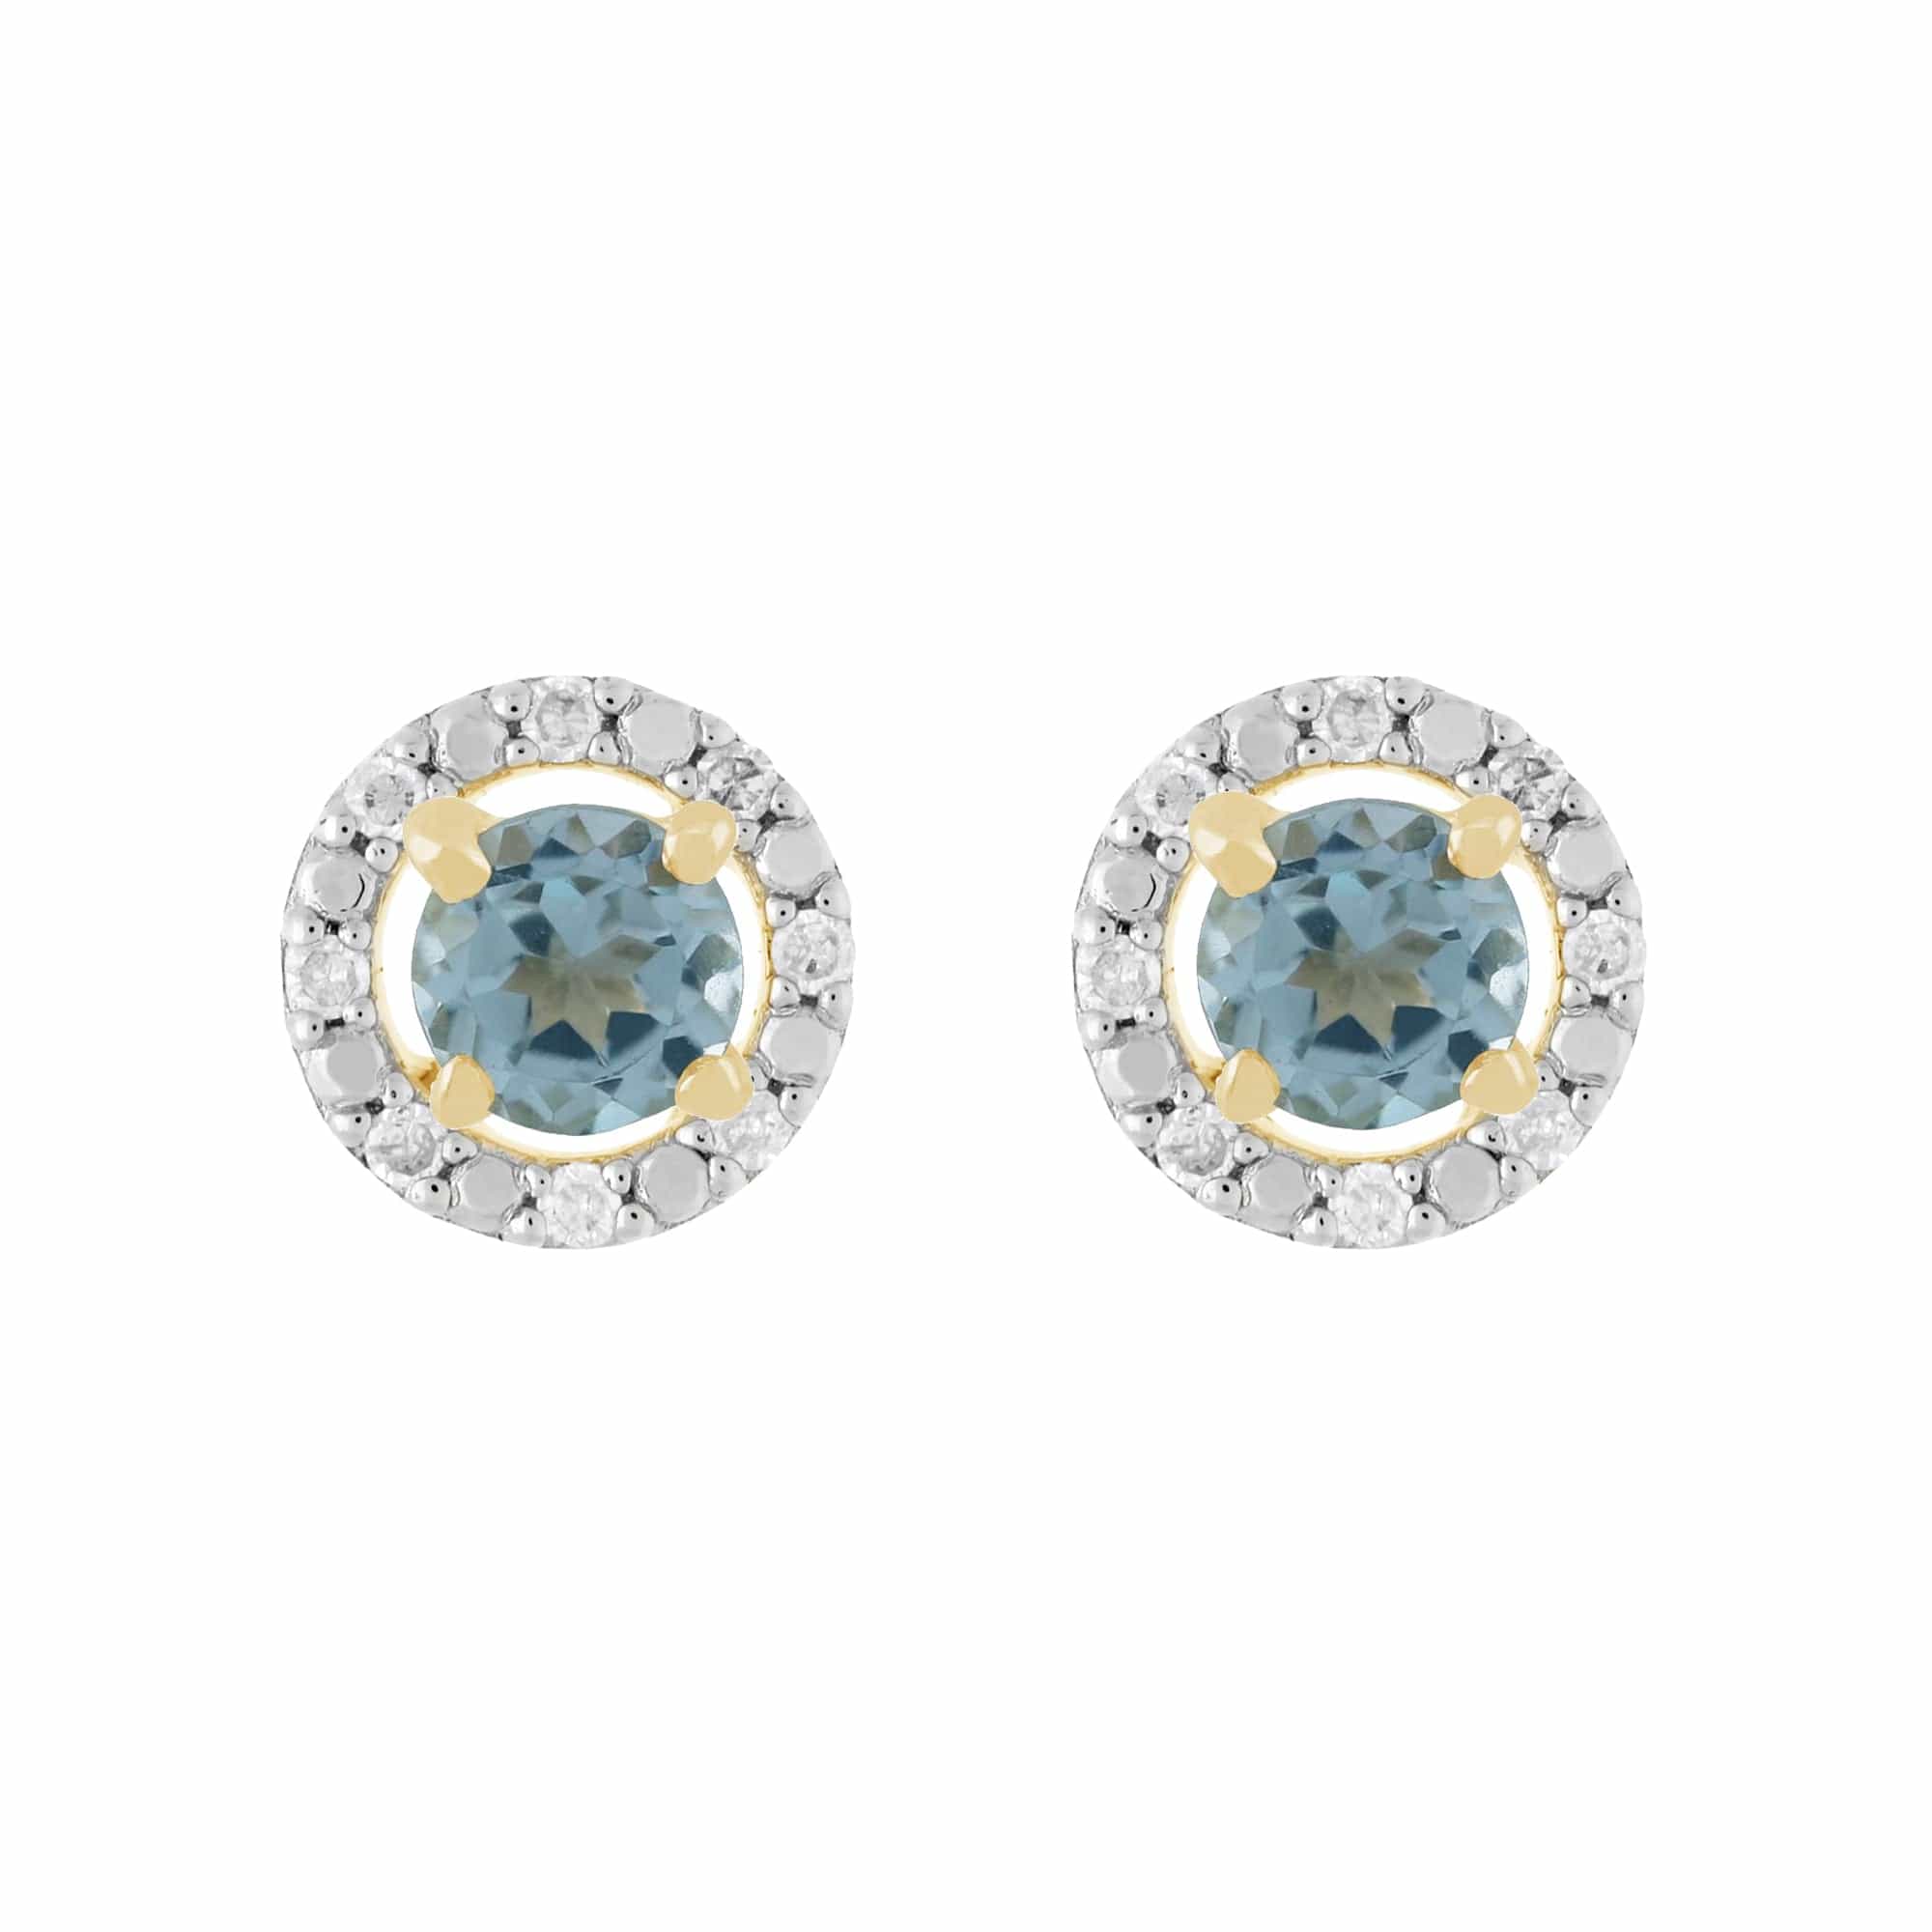 11555-191E0376019 Classic Round Blue Topaz Stud Earrings with Detachable Diamond Round Earrings Jacket Set in 9ct Yellow Gold 1